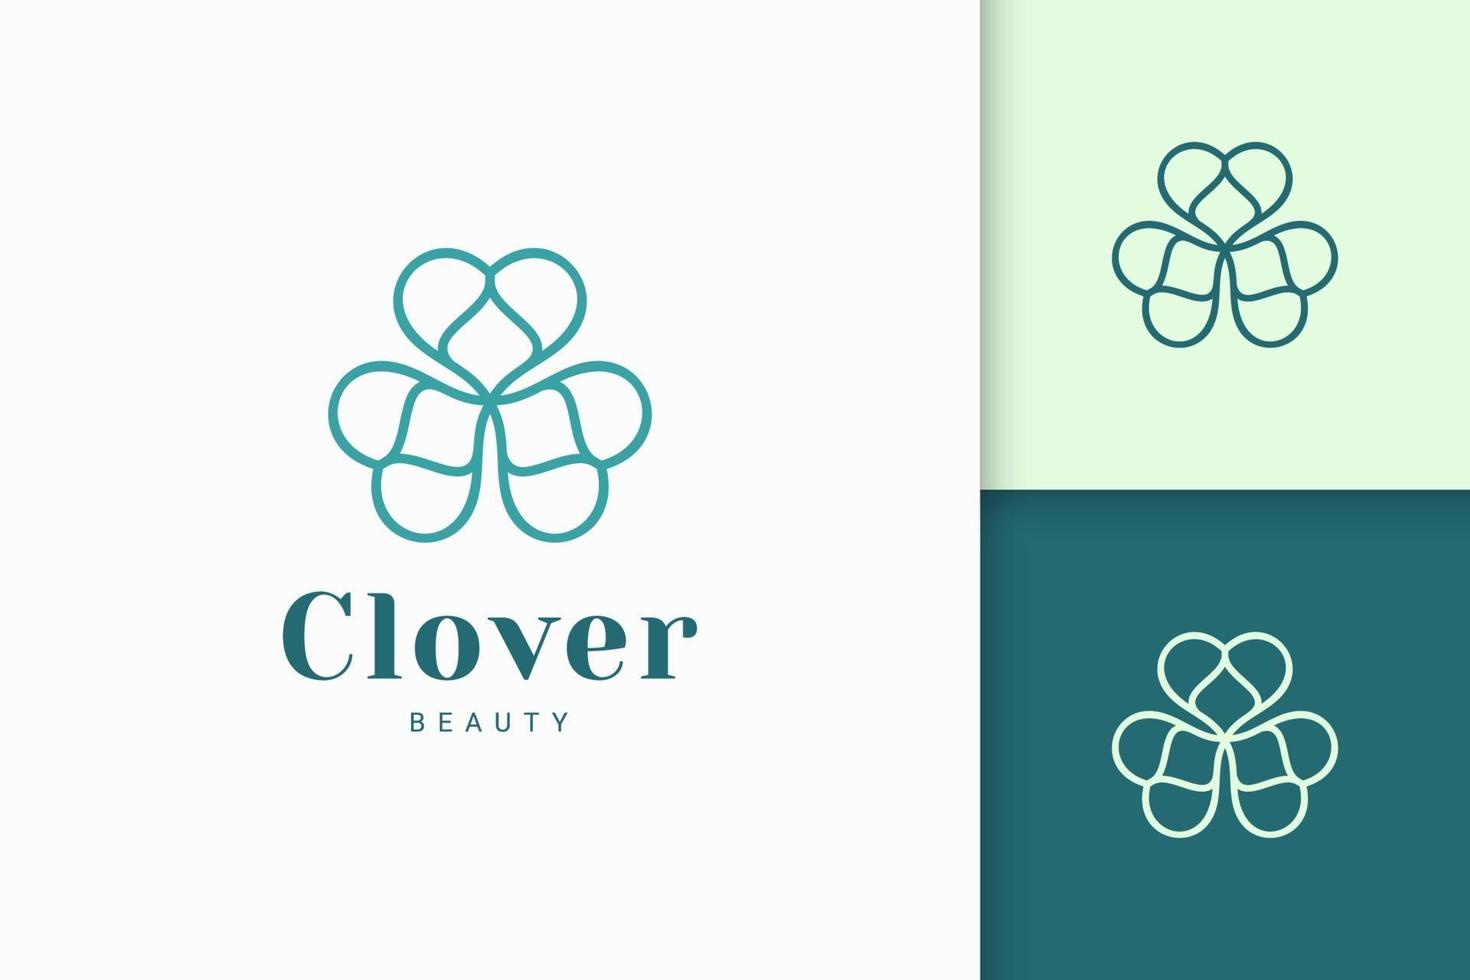 Clover logo in simple line and love shape represent lucky vector